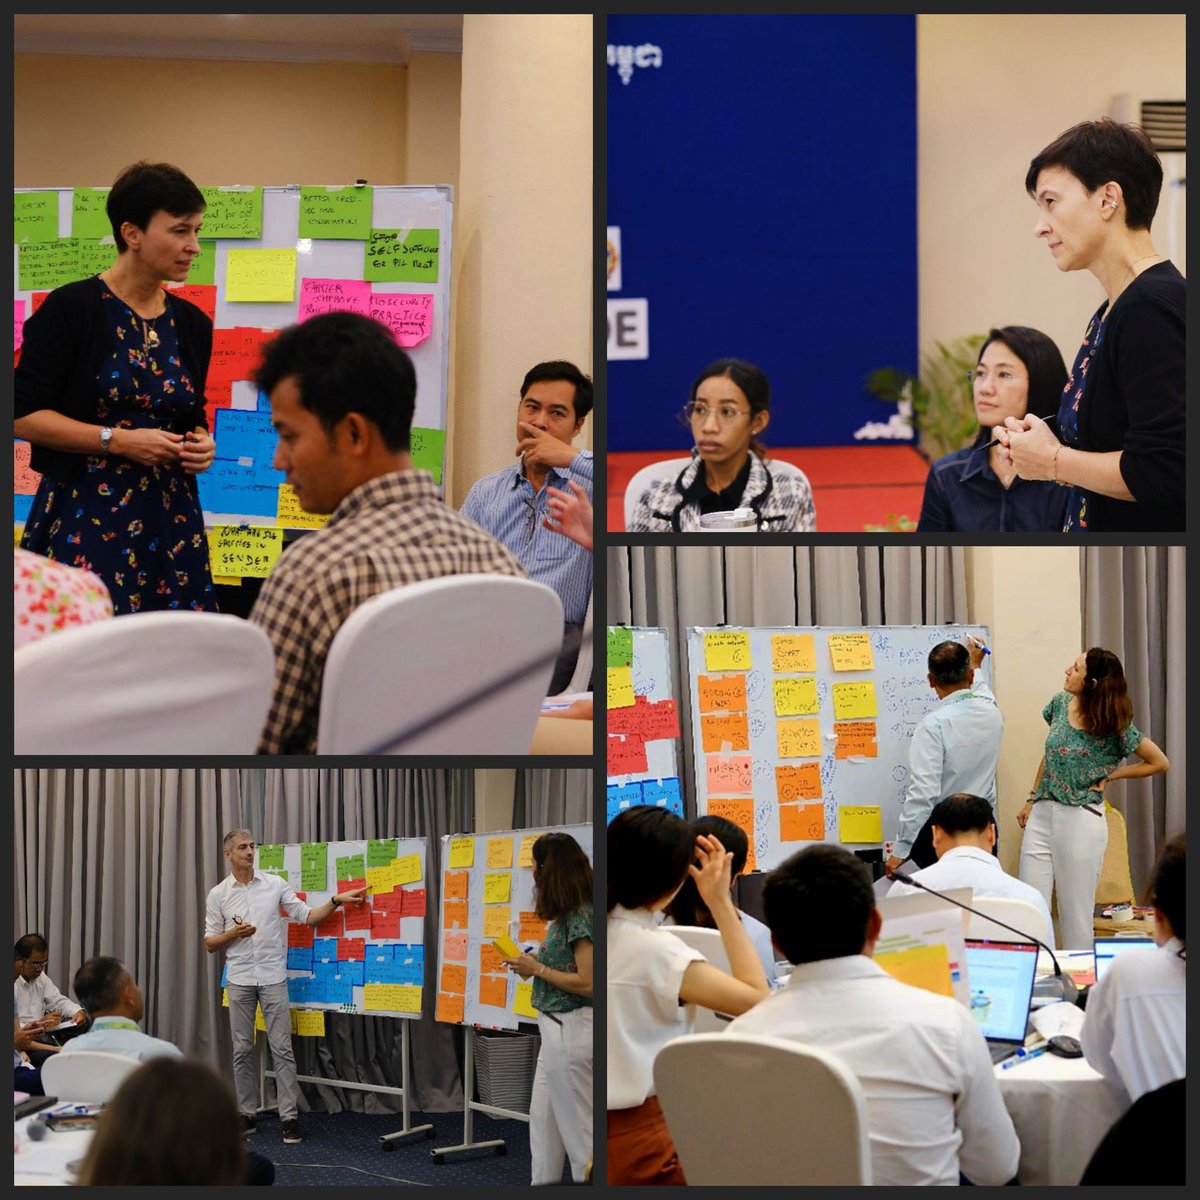 Excellent co-construction workshop as part of #AFRICAM project, with all partners developing a shared vision of the changes that are necessary to achieve desired #impacts.
@Cirad @ird_fr @PREZODE_Intl @Grease_Network @FAOCambodia @WOAH #ImpressMethod #theoryofchange